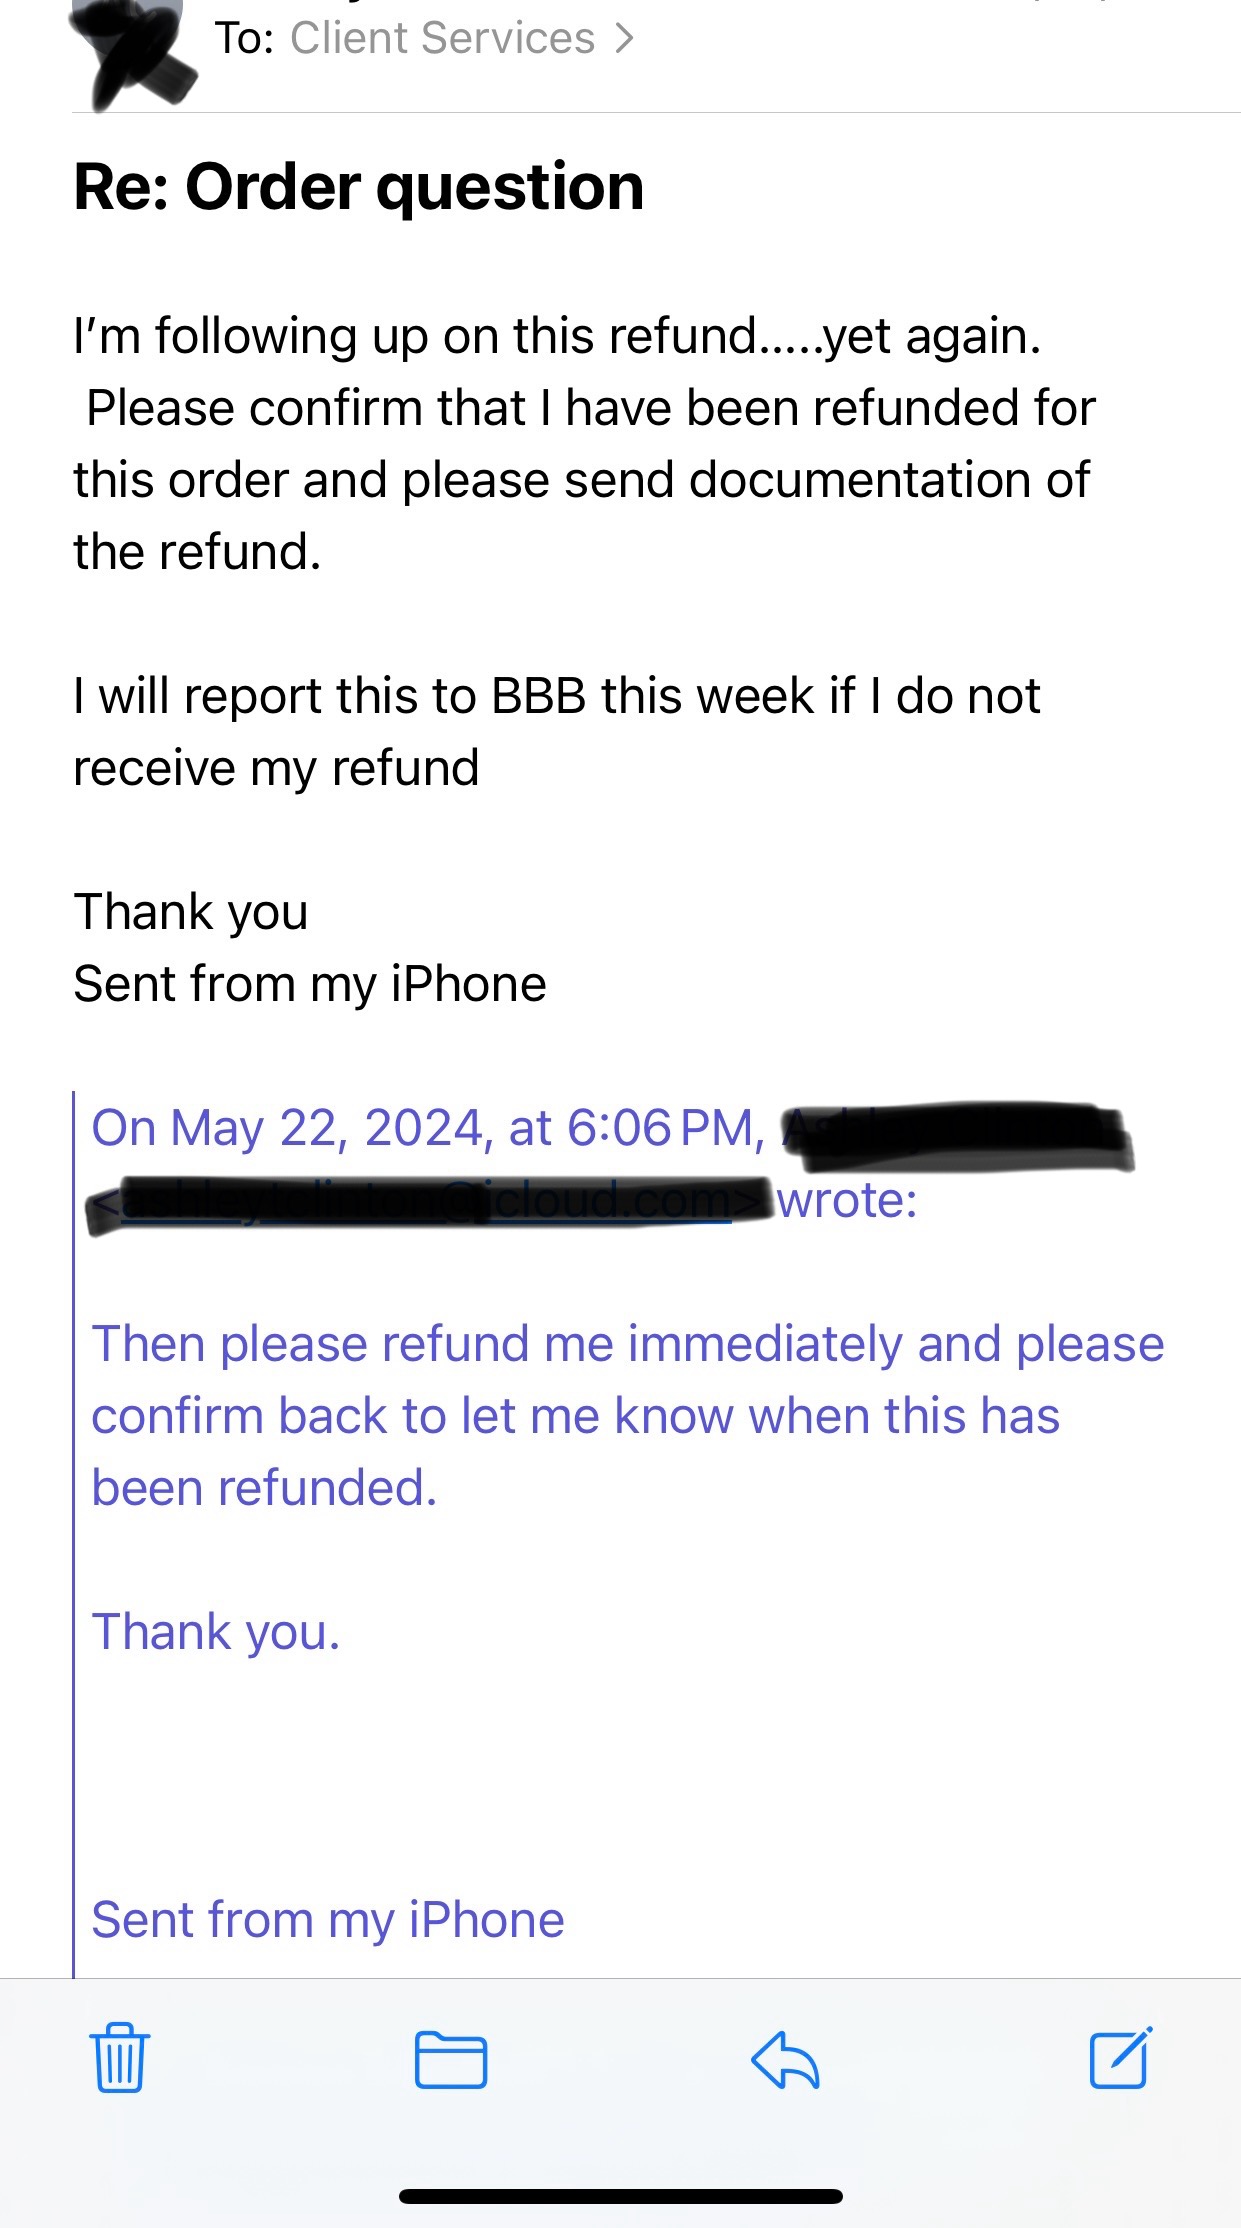 Email asking again for refund. Ignored. 